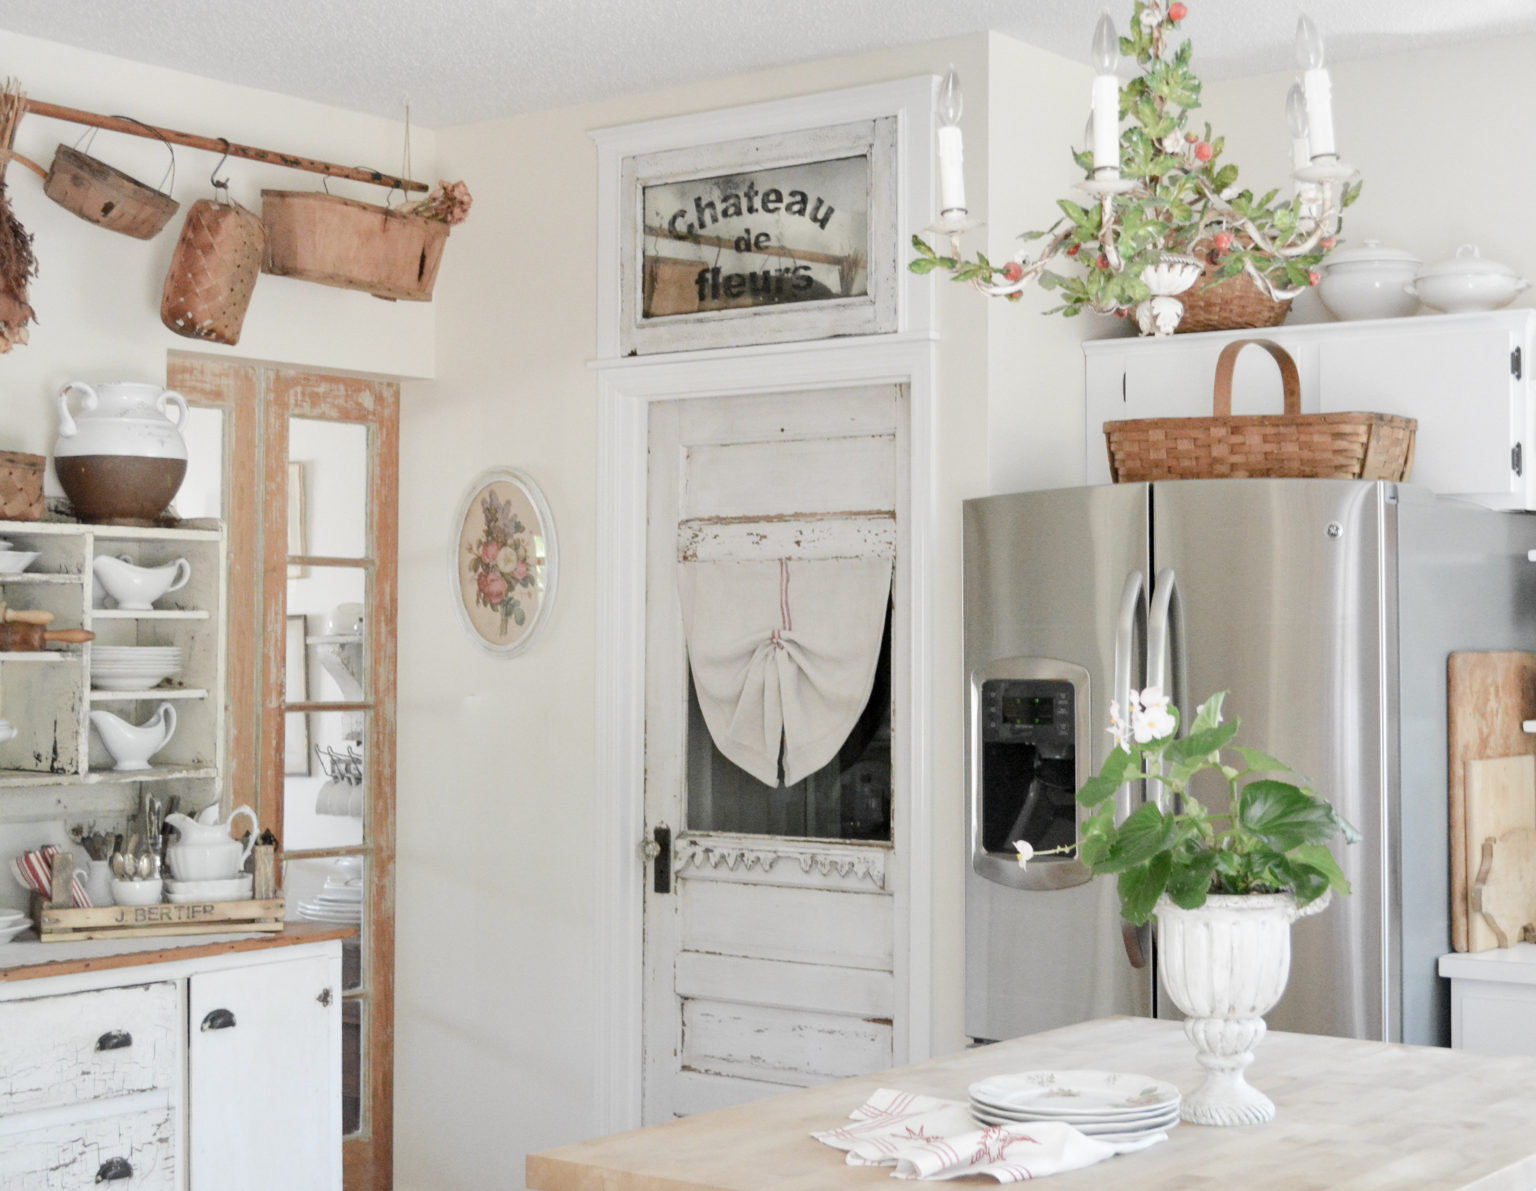 How To Build A Faux Transom Window - Janet Clark at Home